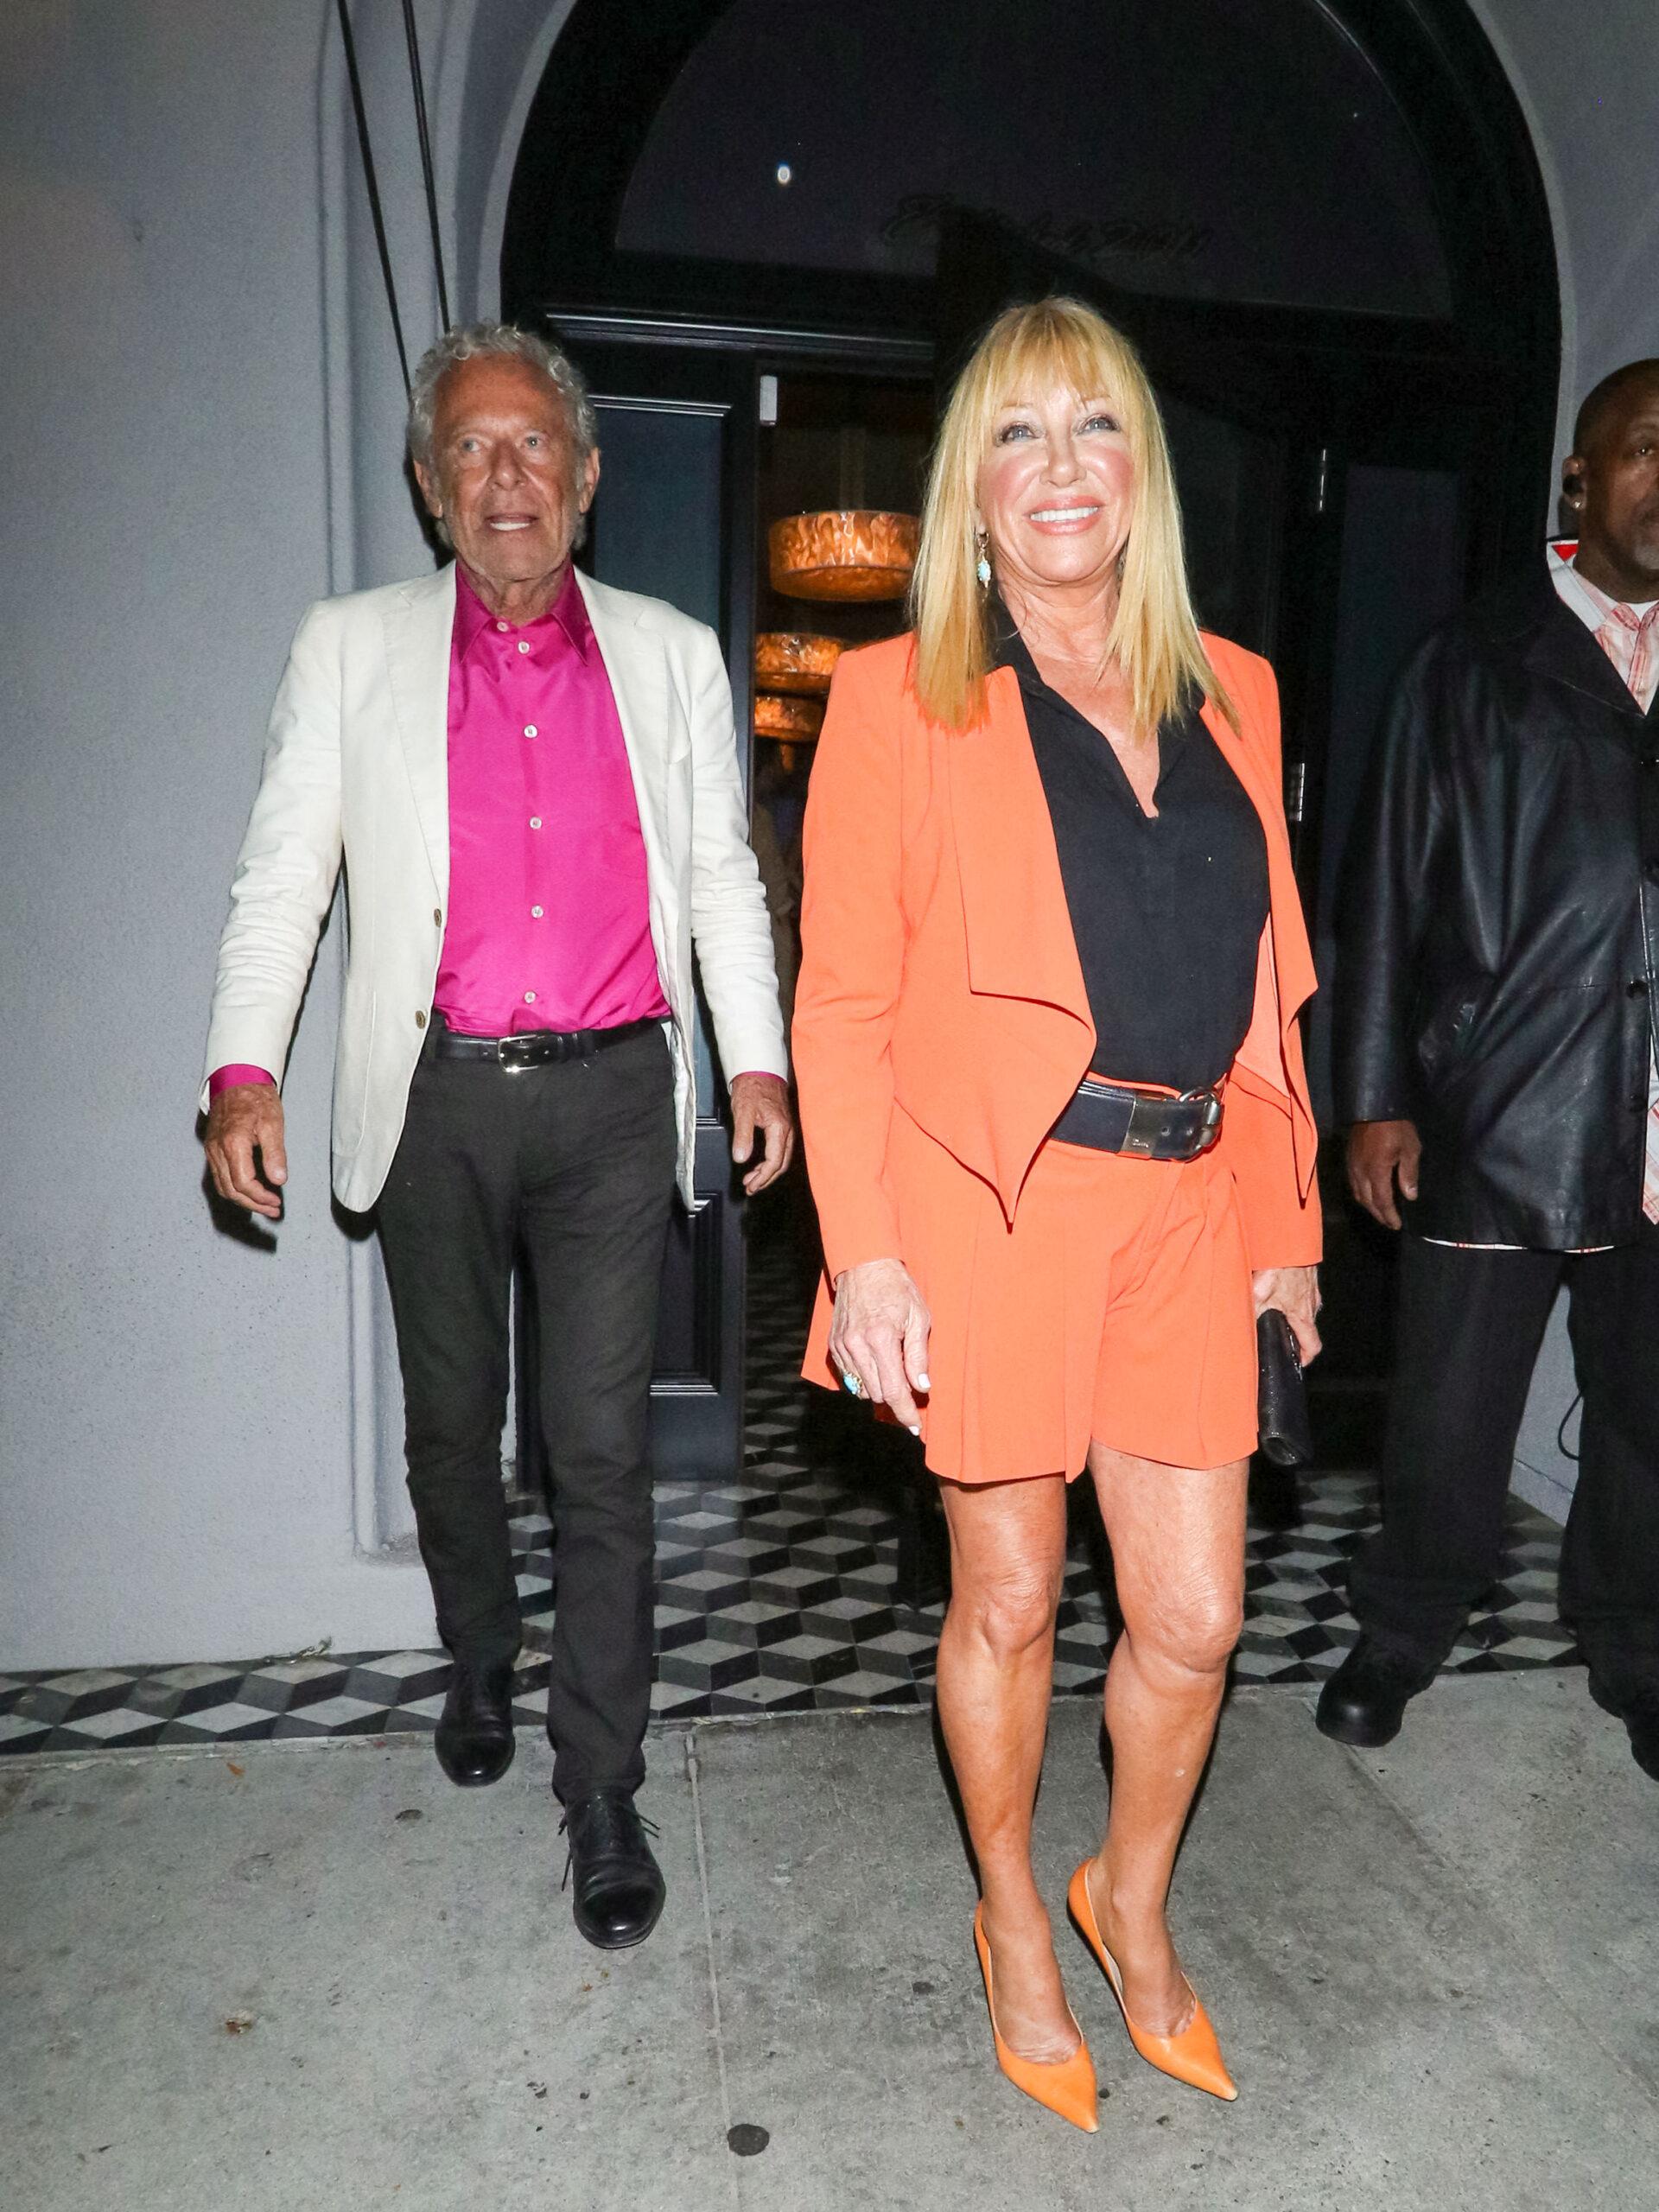 Suzanne Somers and her husband, Alan Hamel seen outside Craig's Restaurant in West Hollywood